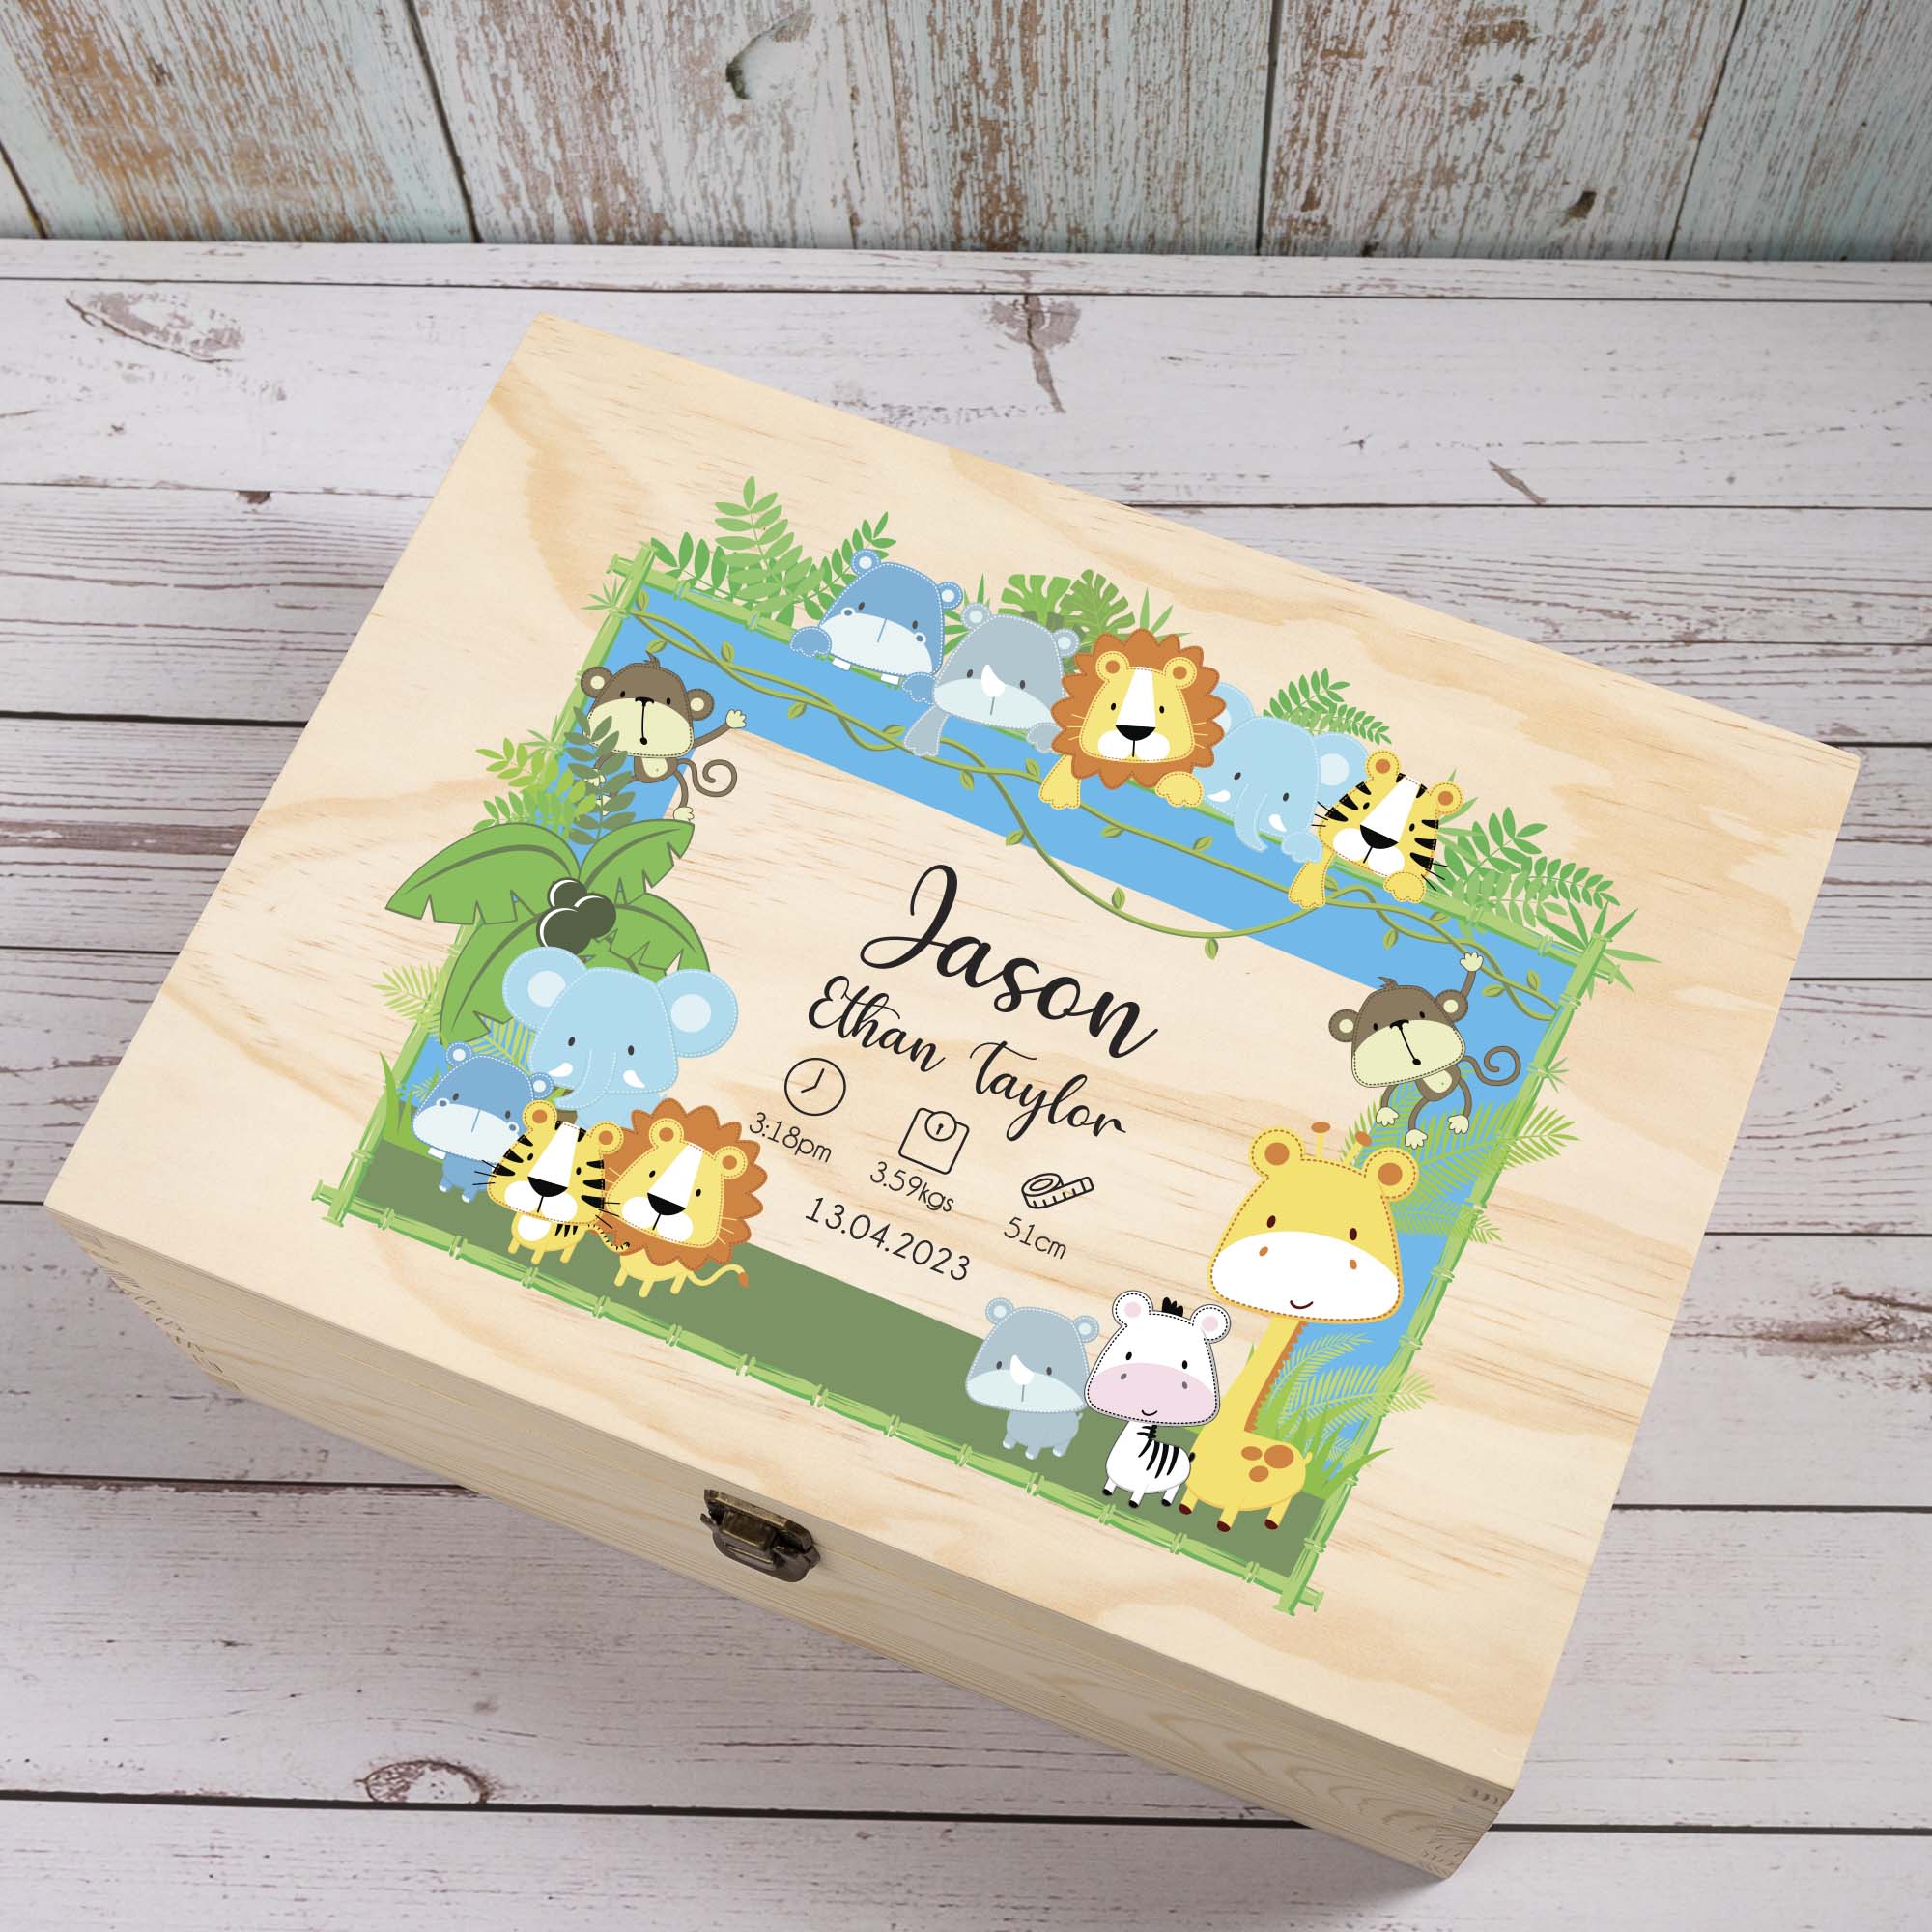 Personalised Wooden Keepsake Box, New Baby and New Mom Gift for Baptism / Christening